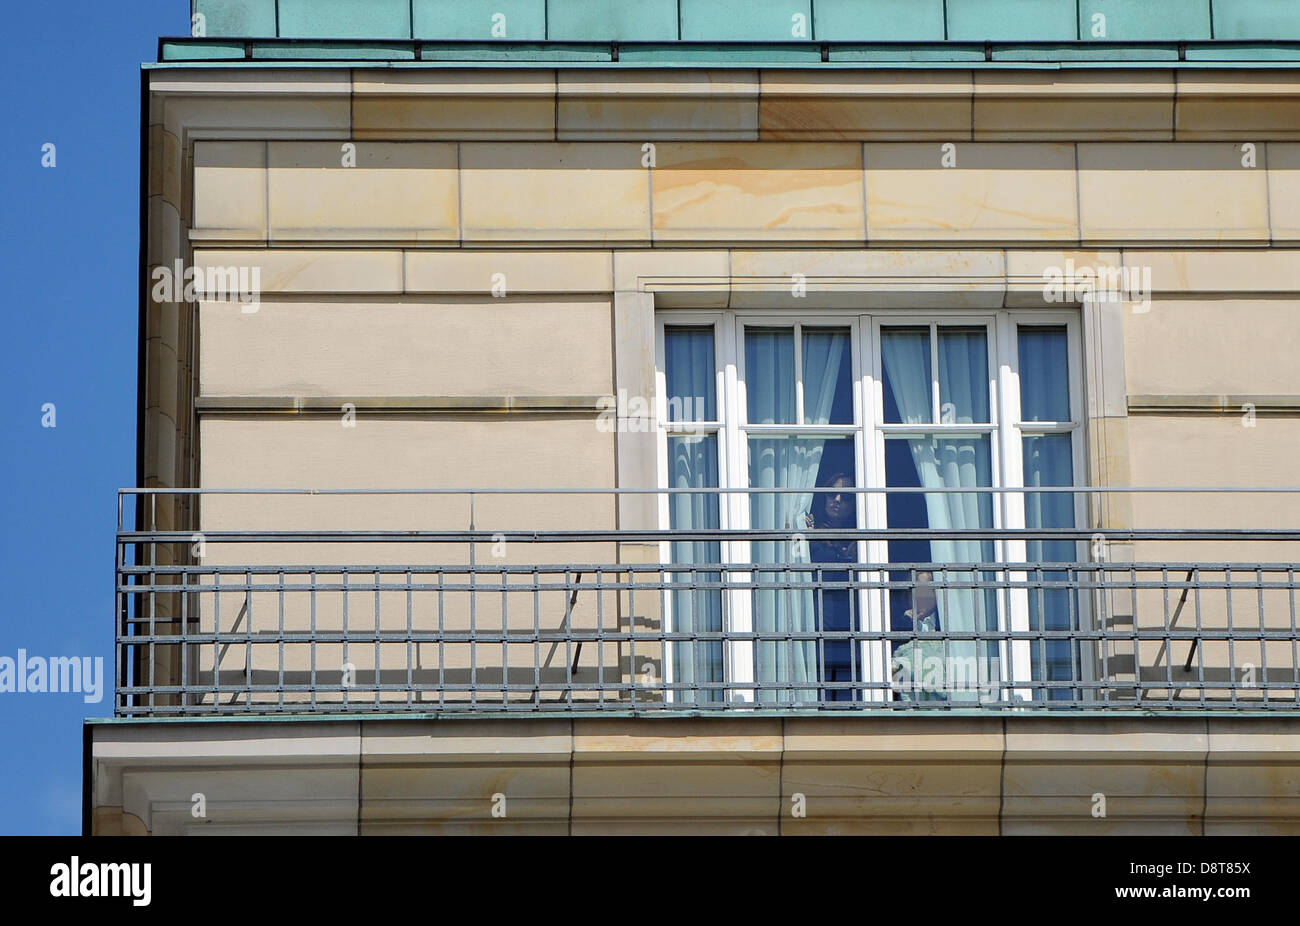 American actress Angelina Jolie and her children look out of the window in their room at Hotel Adlon in Berlin, Germany, 04 June 2013. Photo: BRITTA PEDERSEN (Attention: The children's faces have been pixeled for legal reasons.) Stock Photo